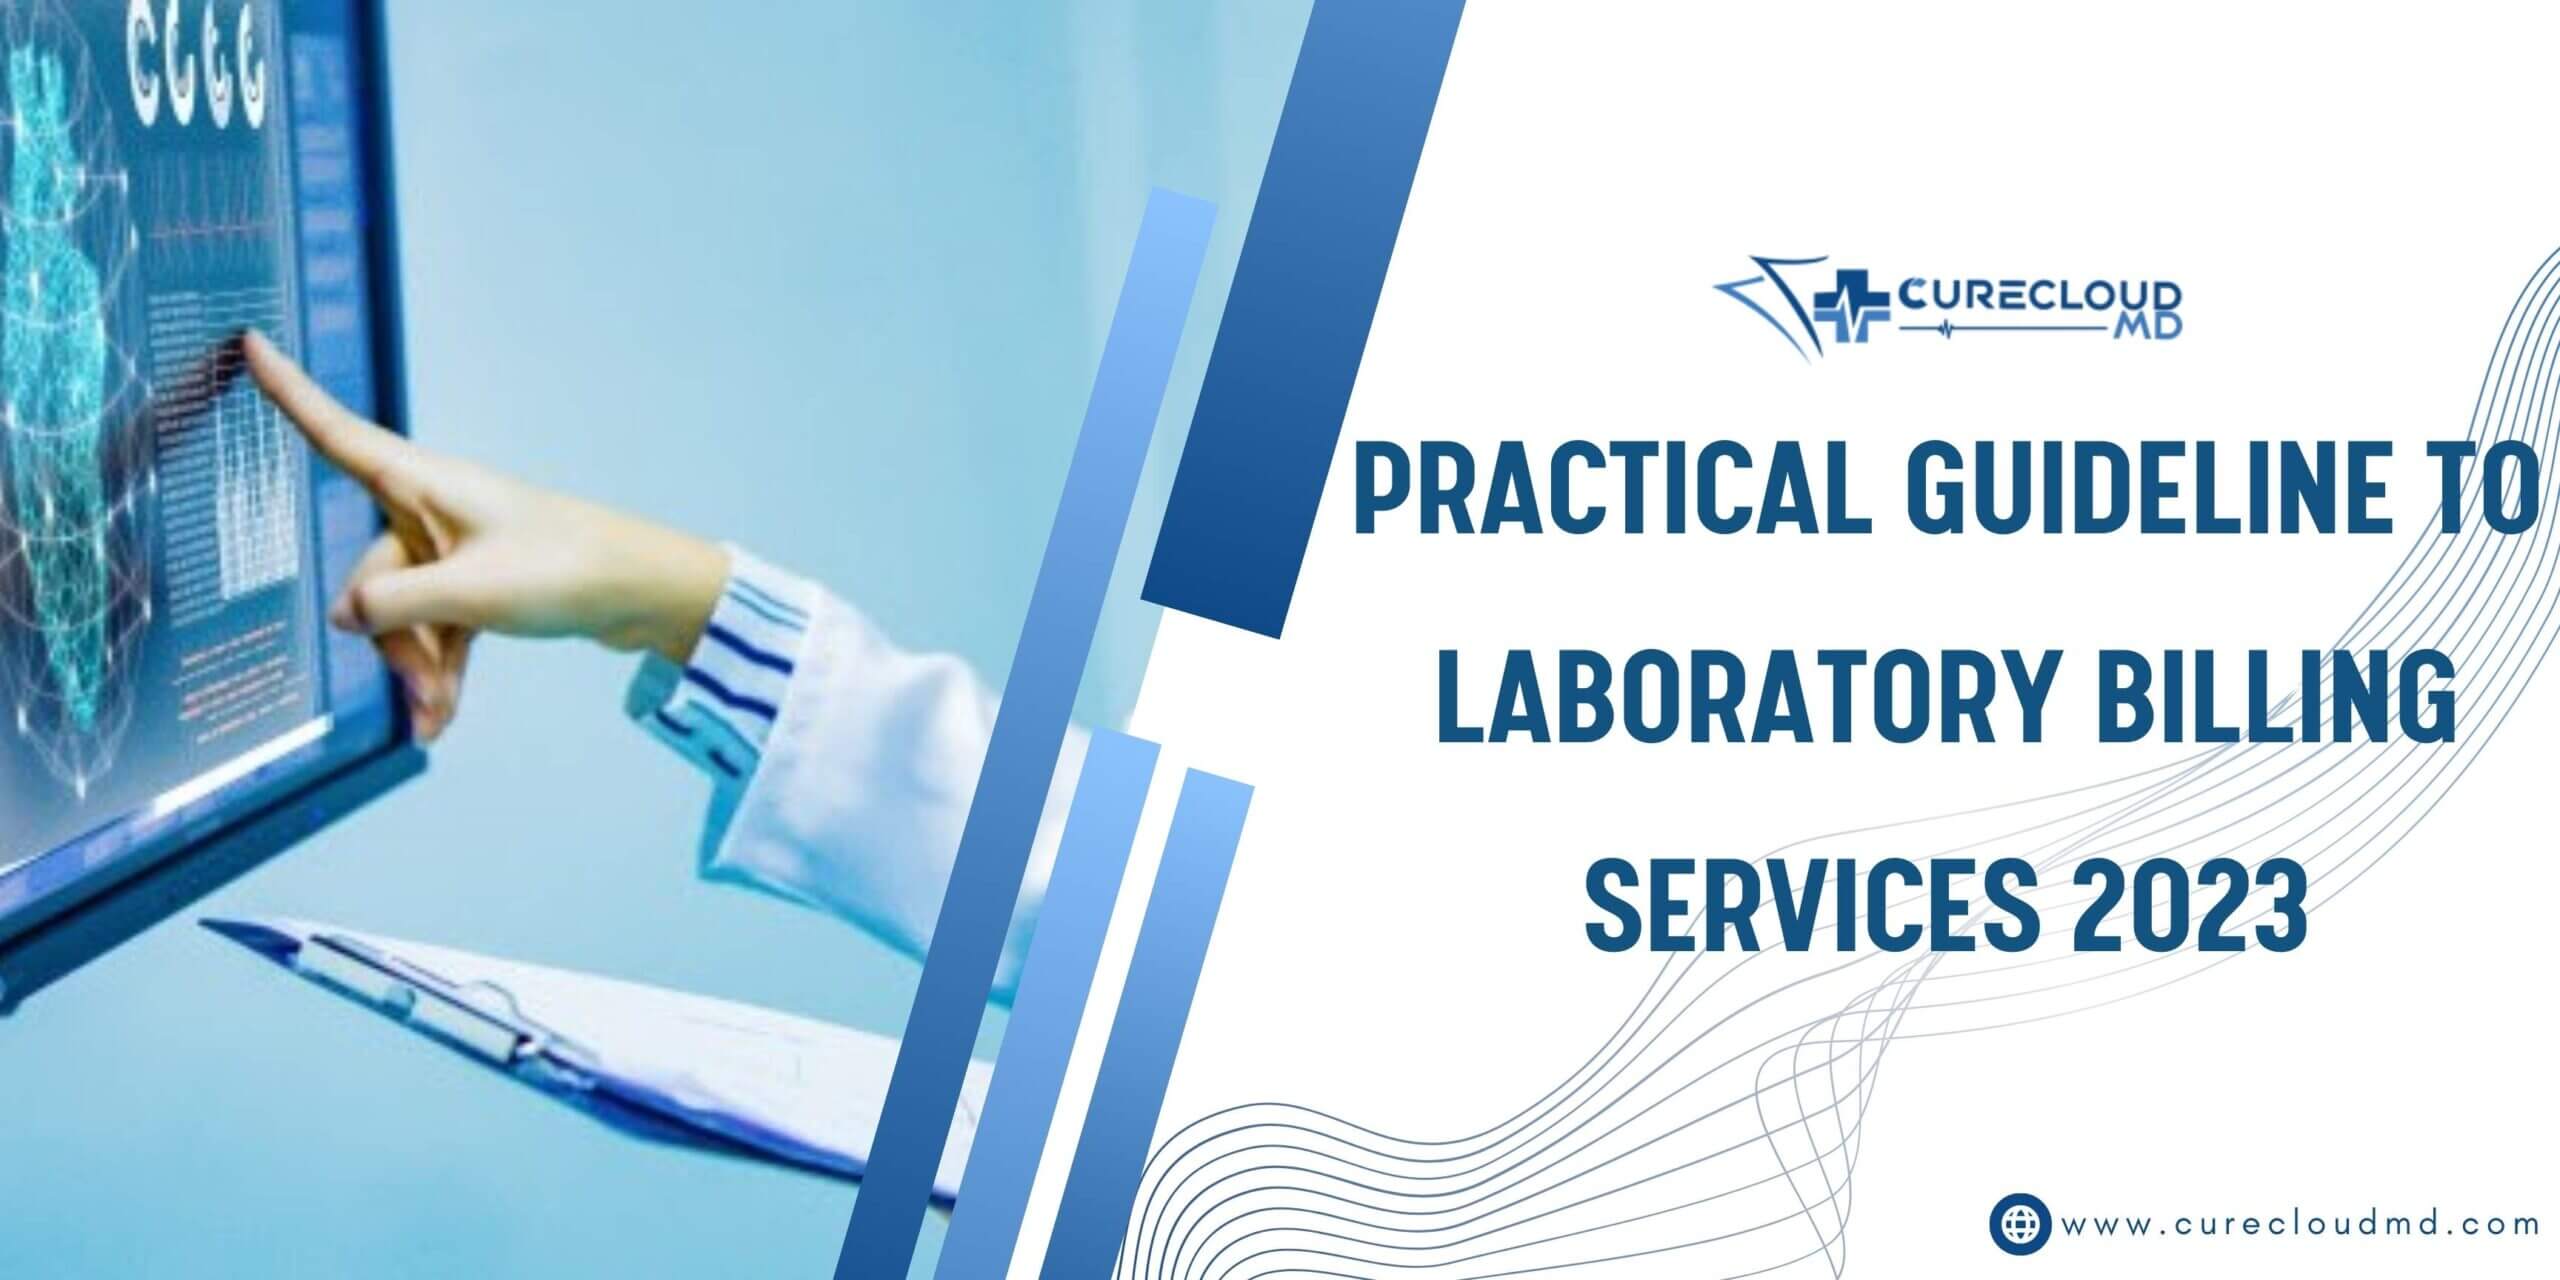 Practical Guideline To Laboratory Billing Services 2023